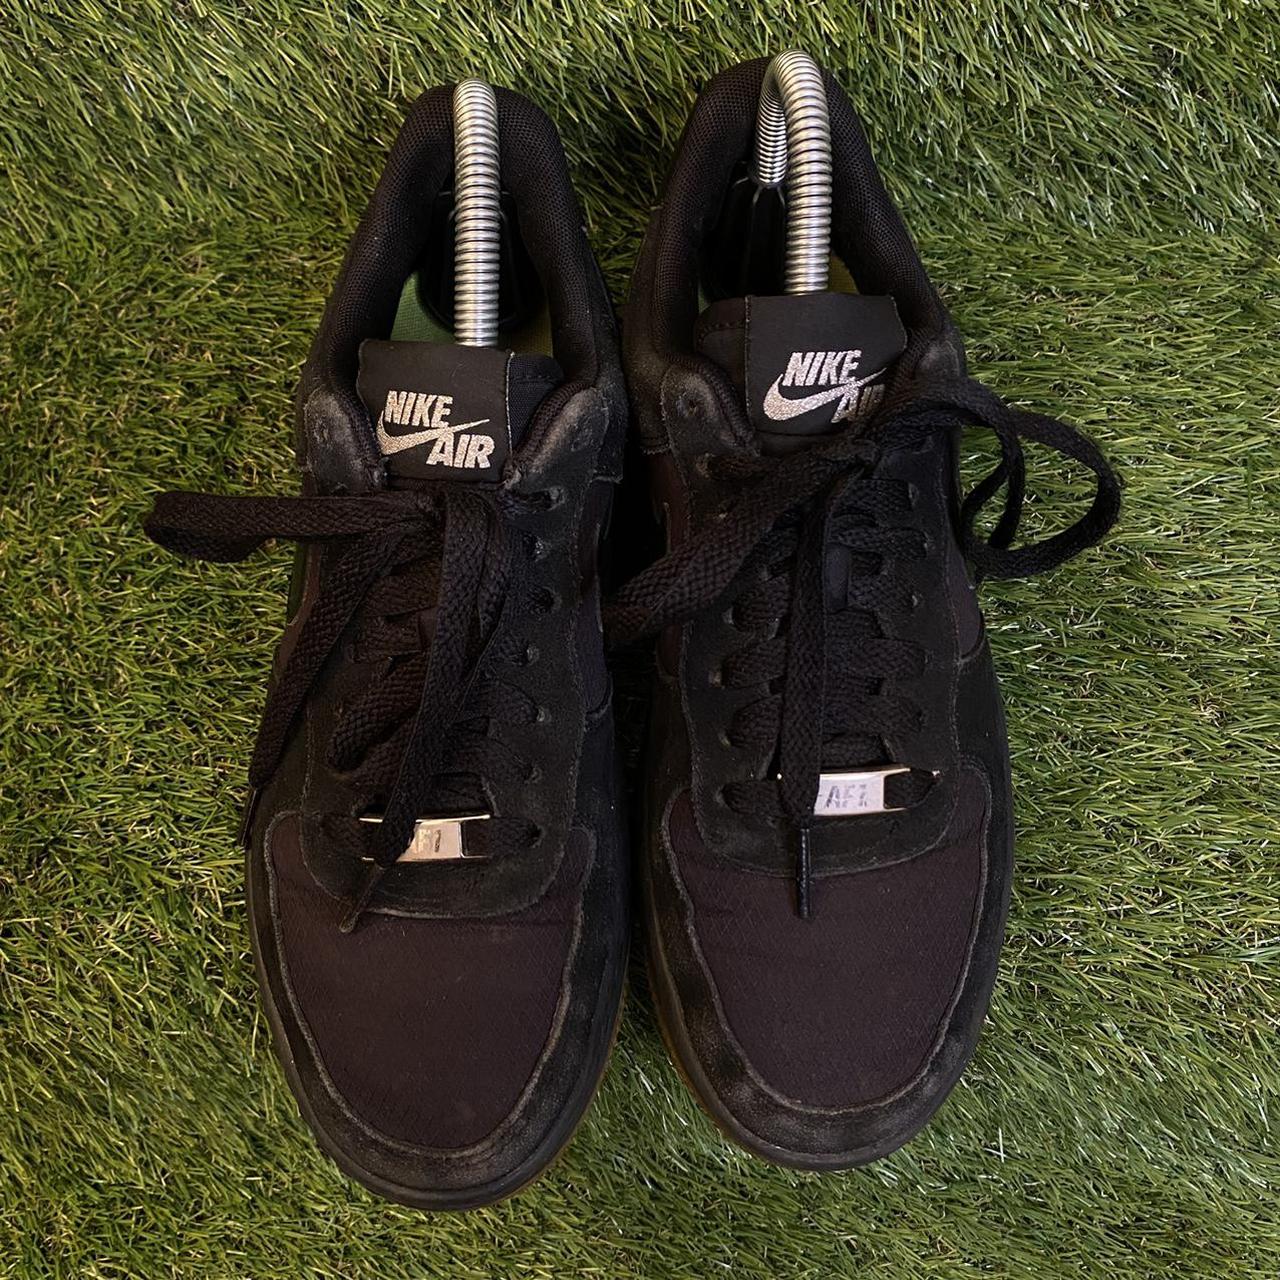 Air force 1 low trainers Nike Black size 10.5 UK in Suede - 31755988